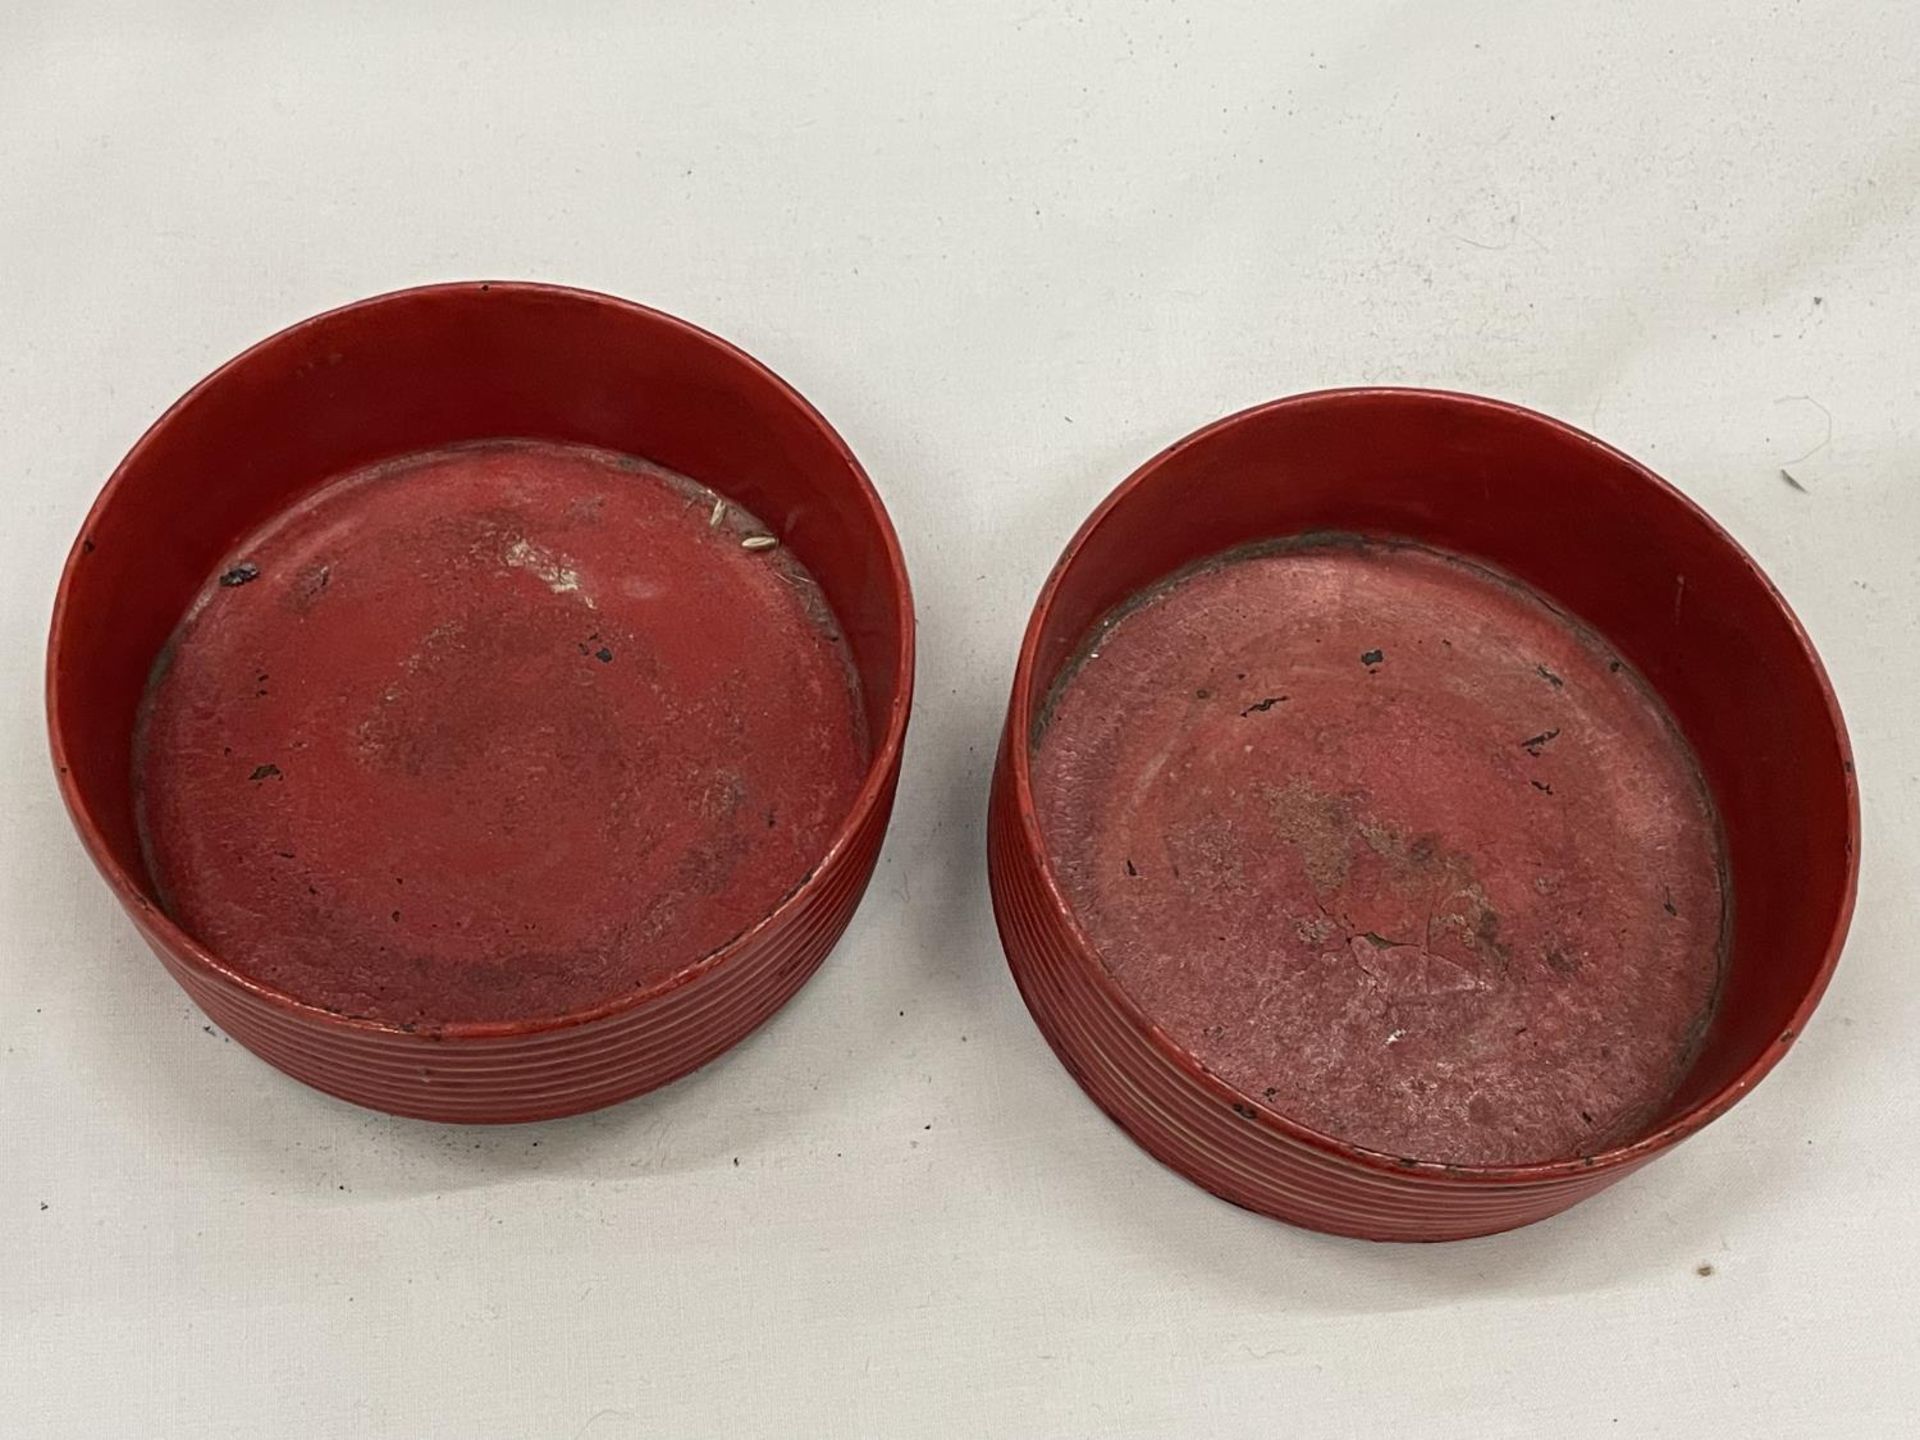 A PAIR OF BELIEVED ENGLISH REGENCY CIRCA 19TH CENTURY WINE COASTERS IN CINNABAR RED LACQUER - Image 3 of 4